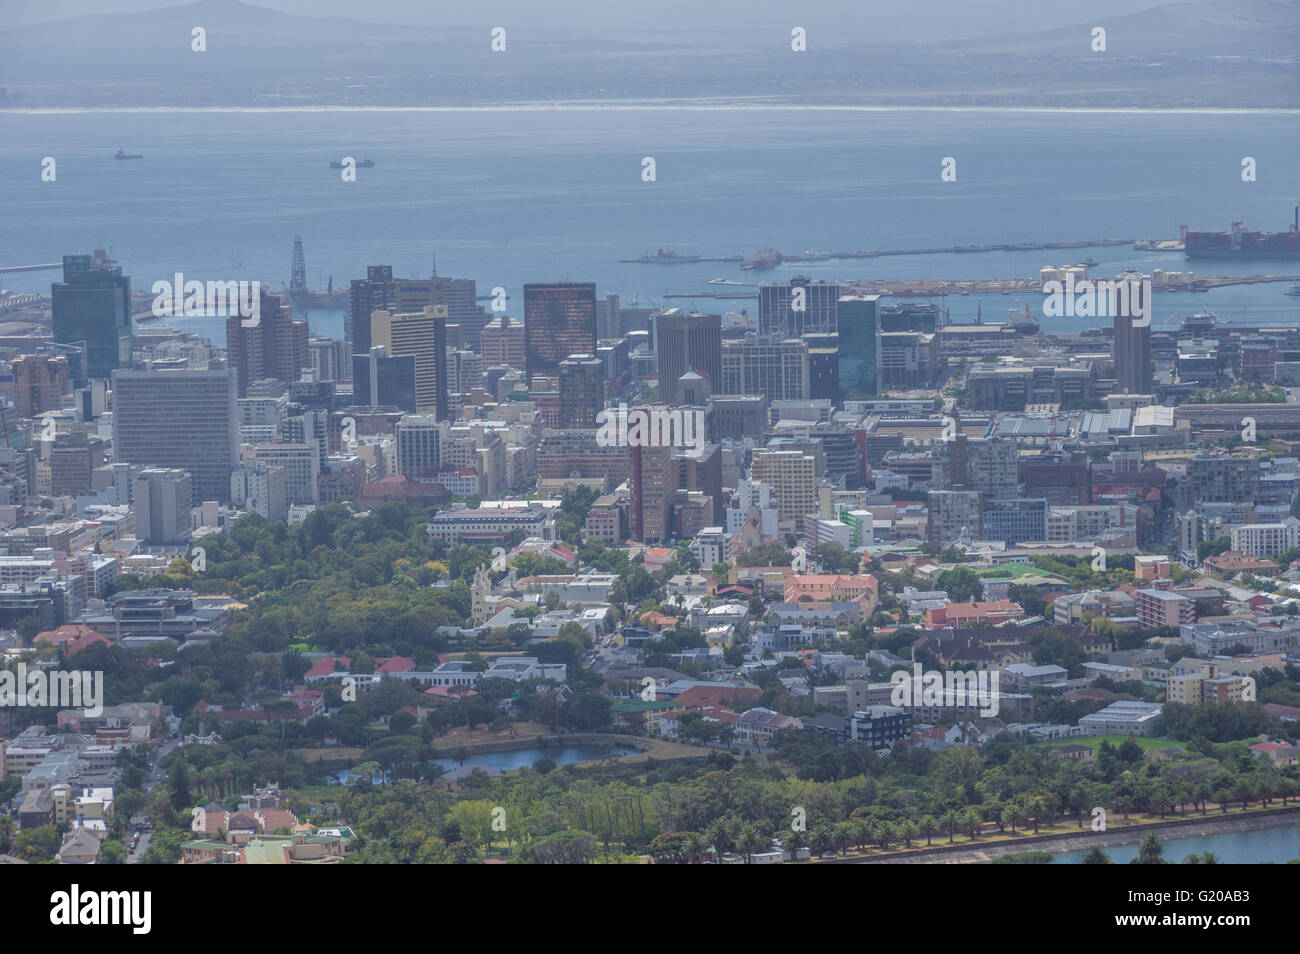 Table Mountain overlooks the city of Cape Town and is a famous landmark of South Africa Stock Photo